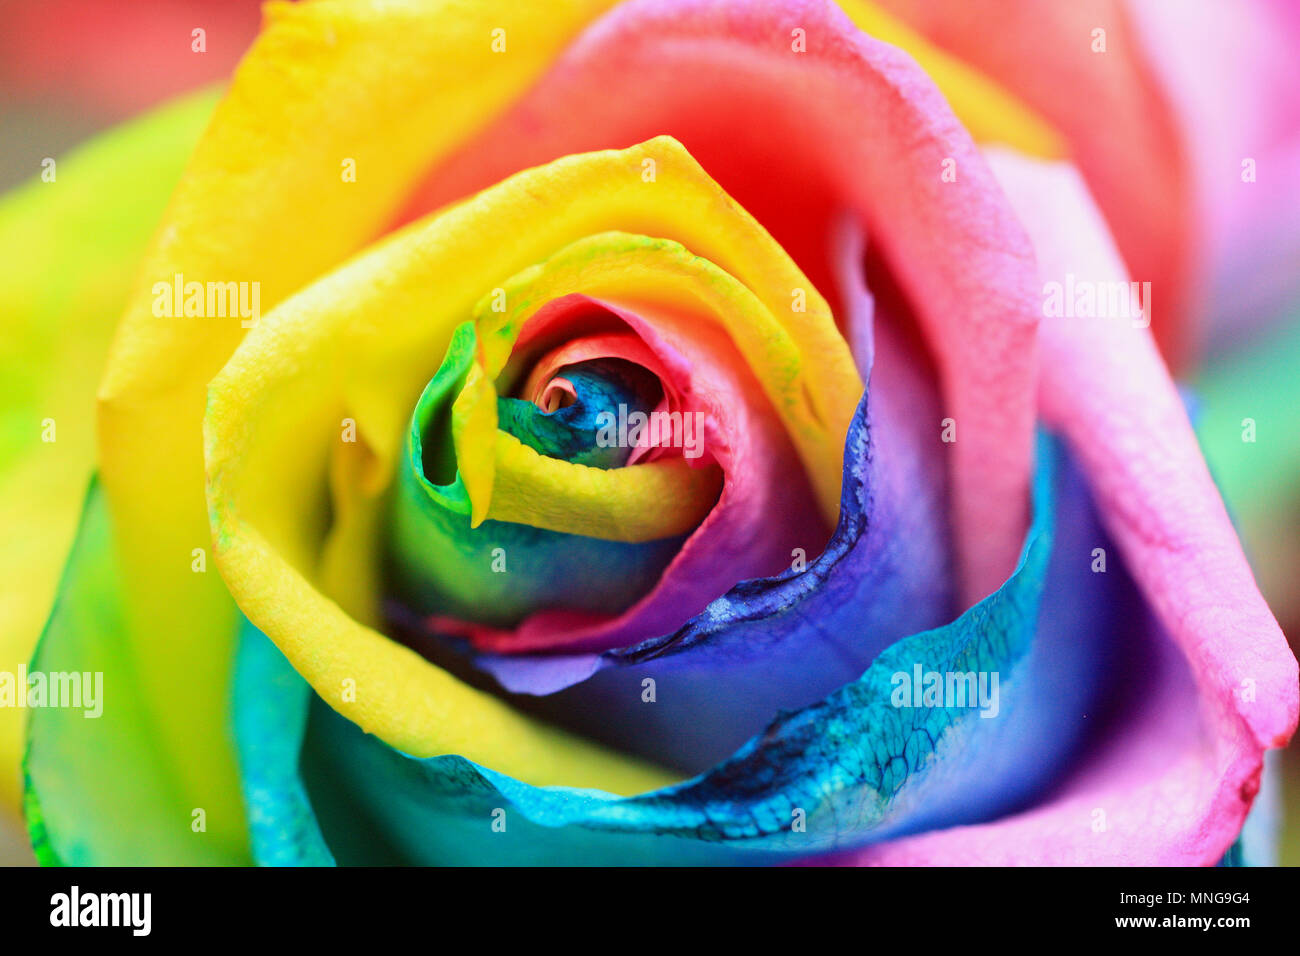 LGBT pride flag made of rose petals made into rose of rainbow colors. On a  rustic wooden background Stock Photo - Alamy